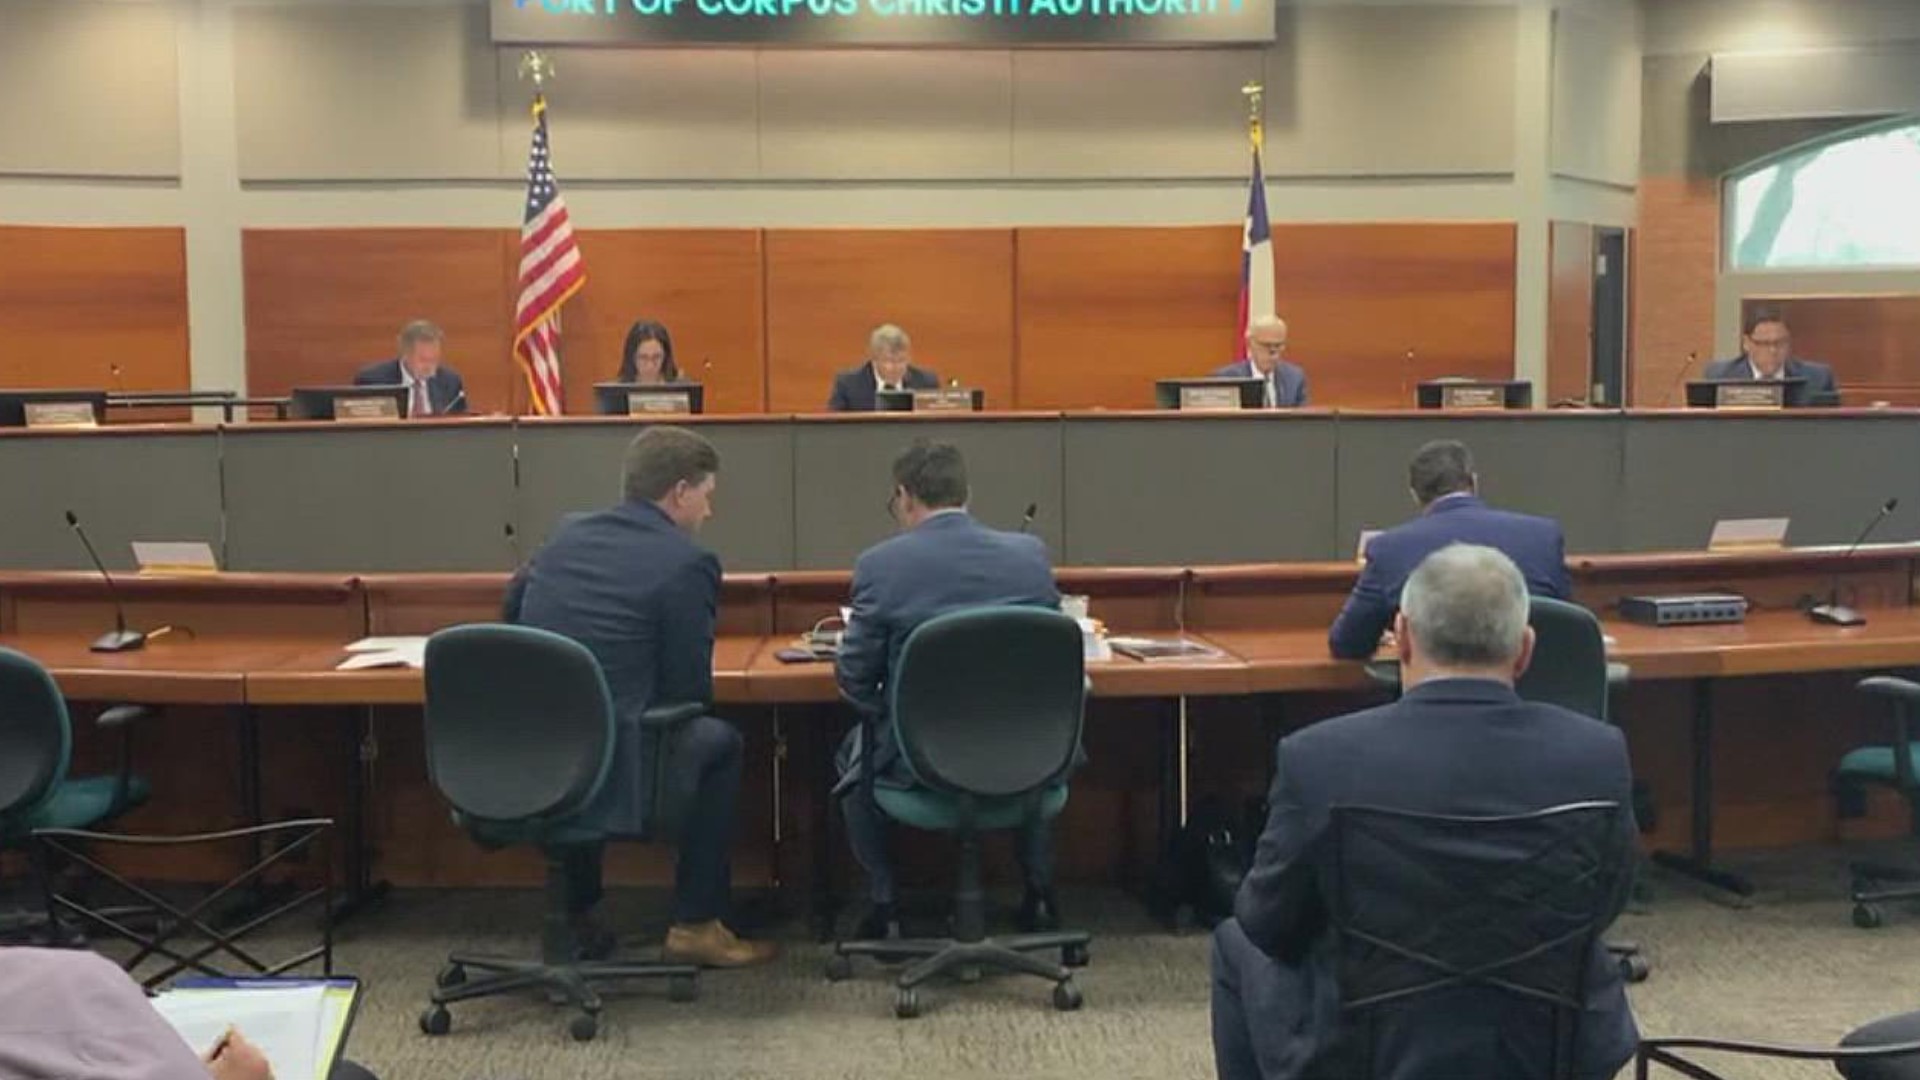 The City of Corpus Christi said Wednesday it wants the Port of Corpus Christi to withdraw it's $500 million application for a desalination plant.